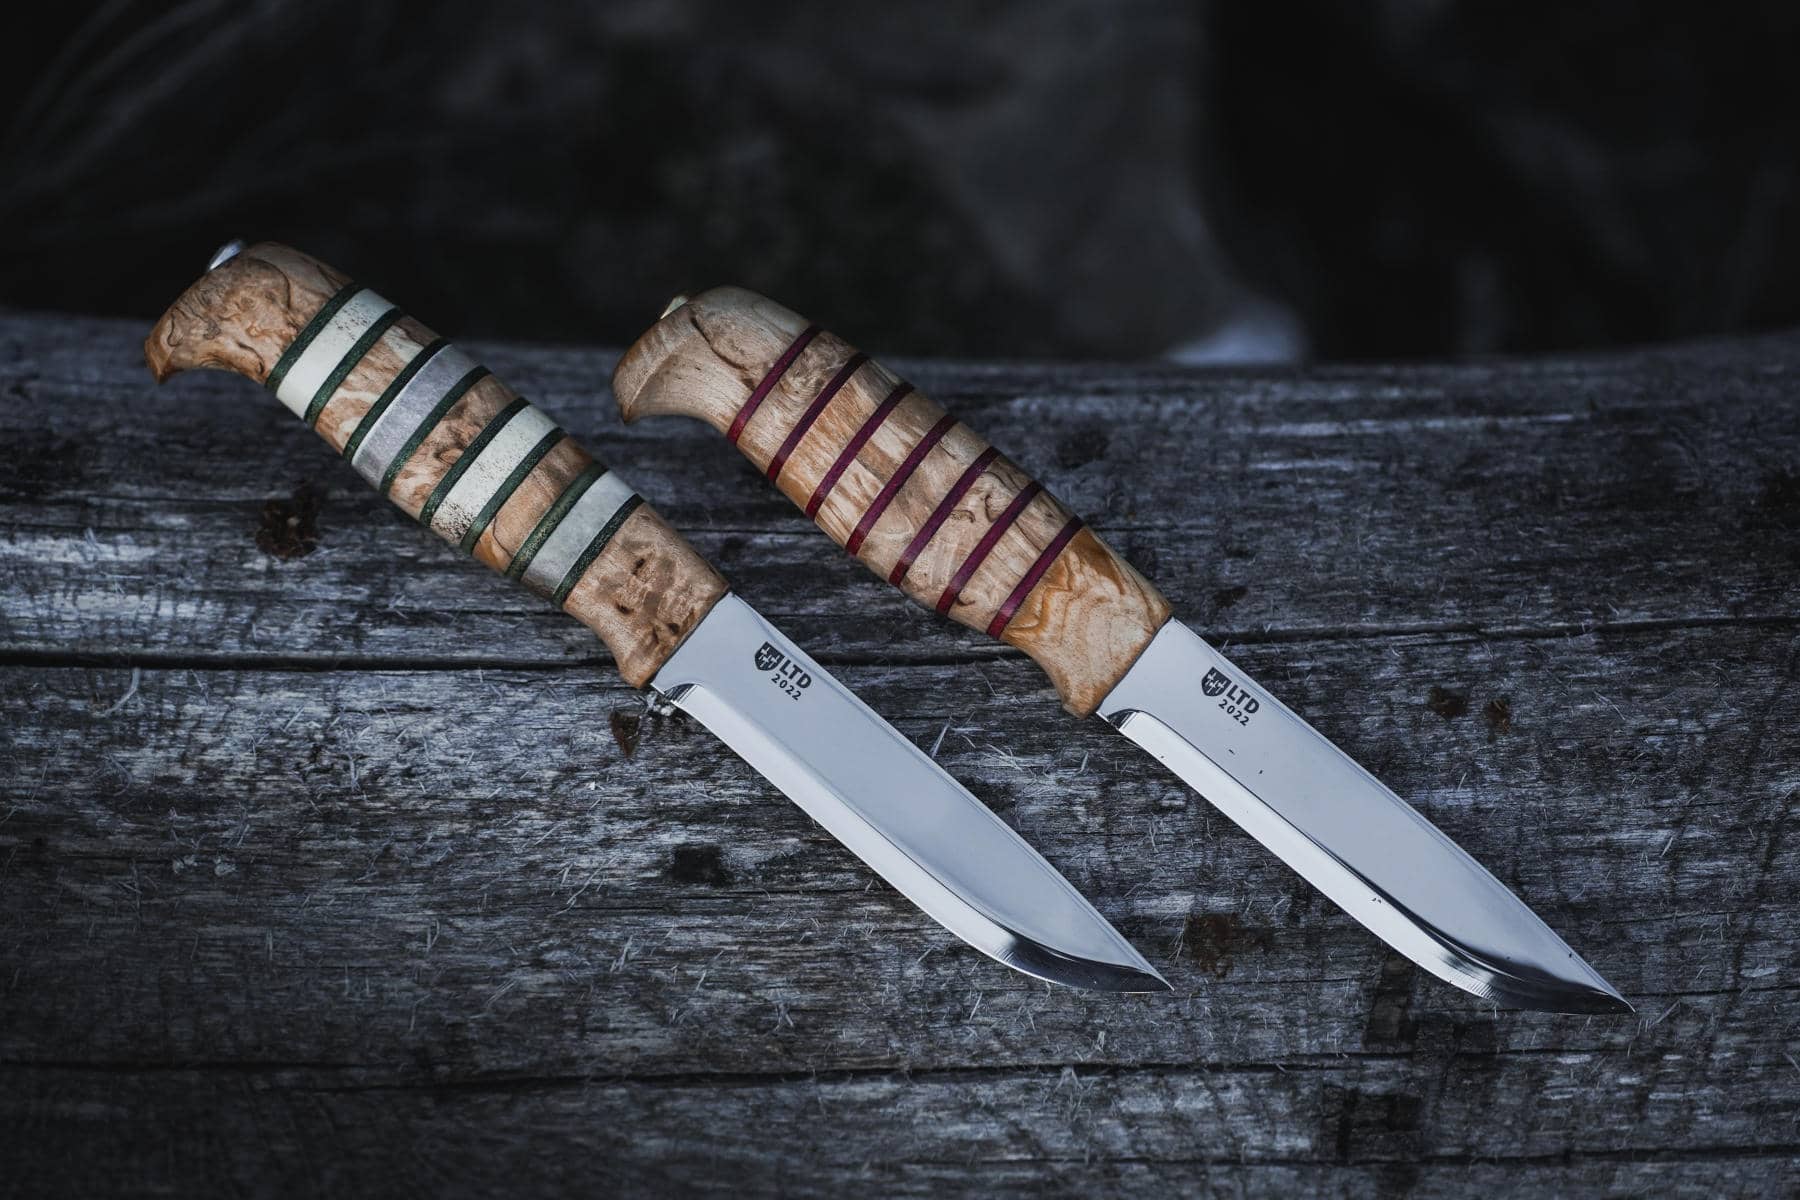 JS & SE: The 2022 Limited Edition knives: Celebrating 90 years of knifemaking in Holmedal